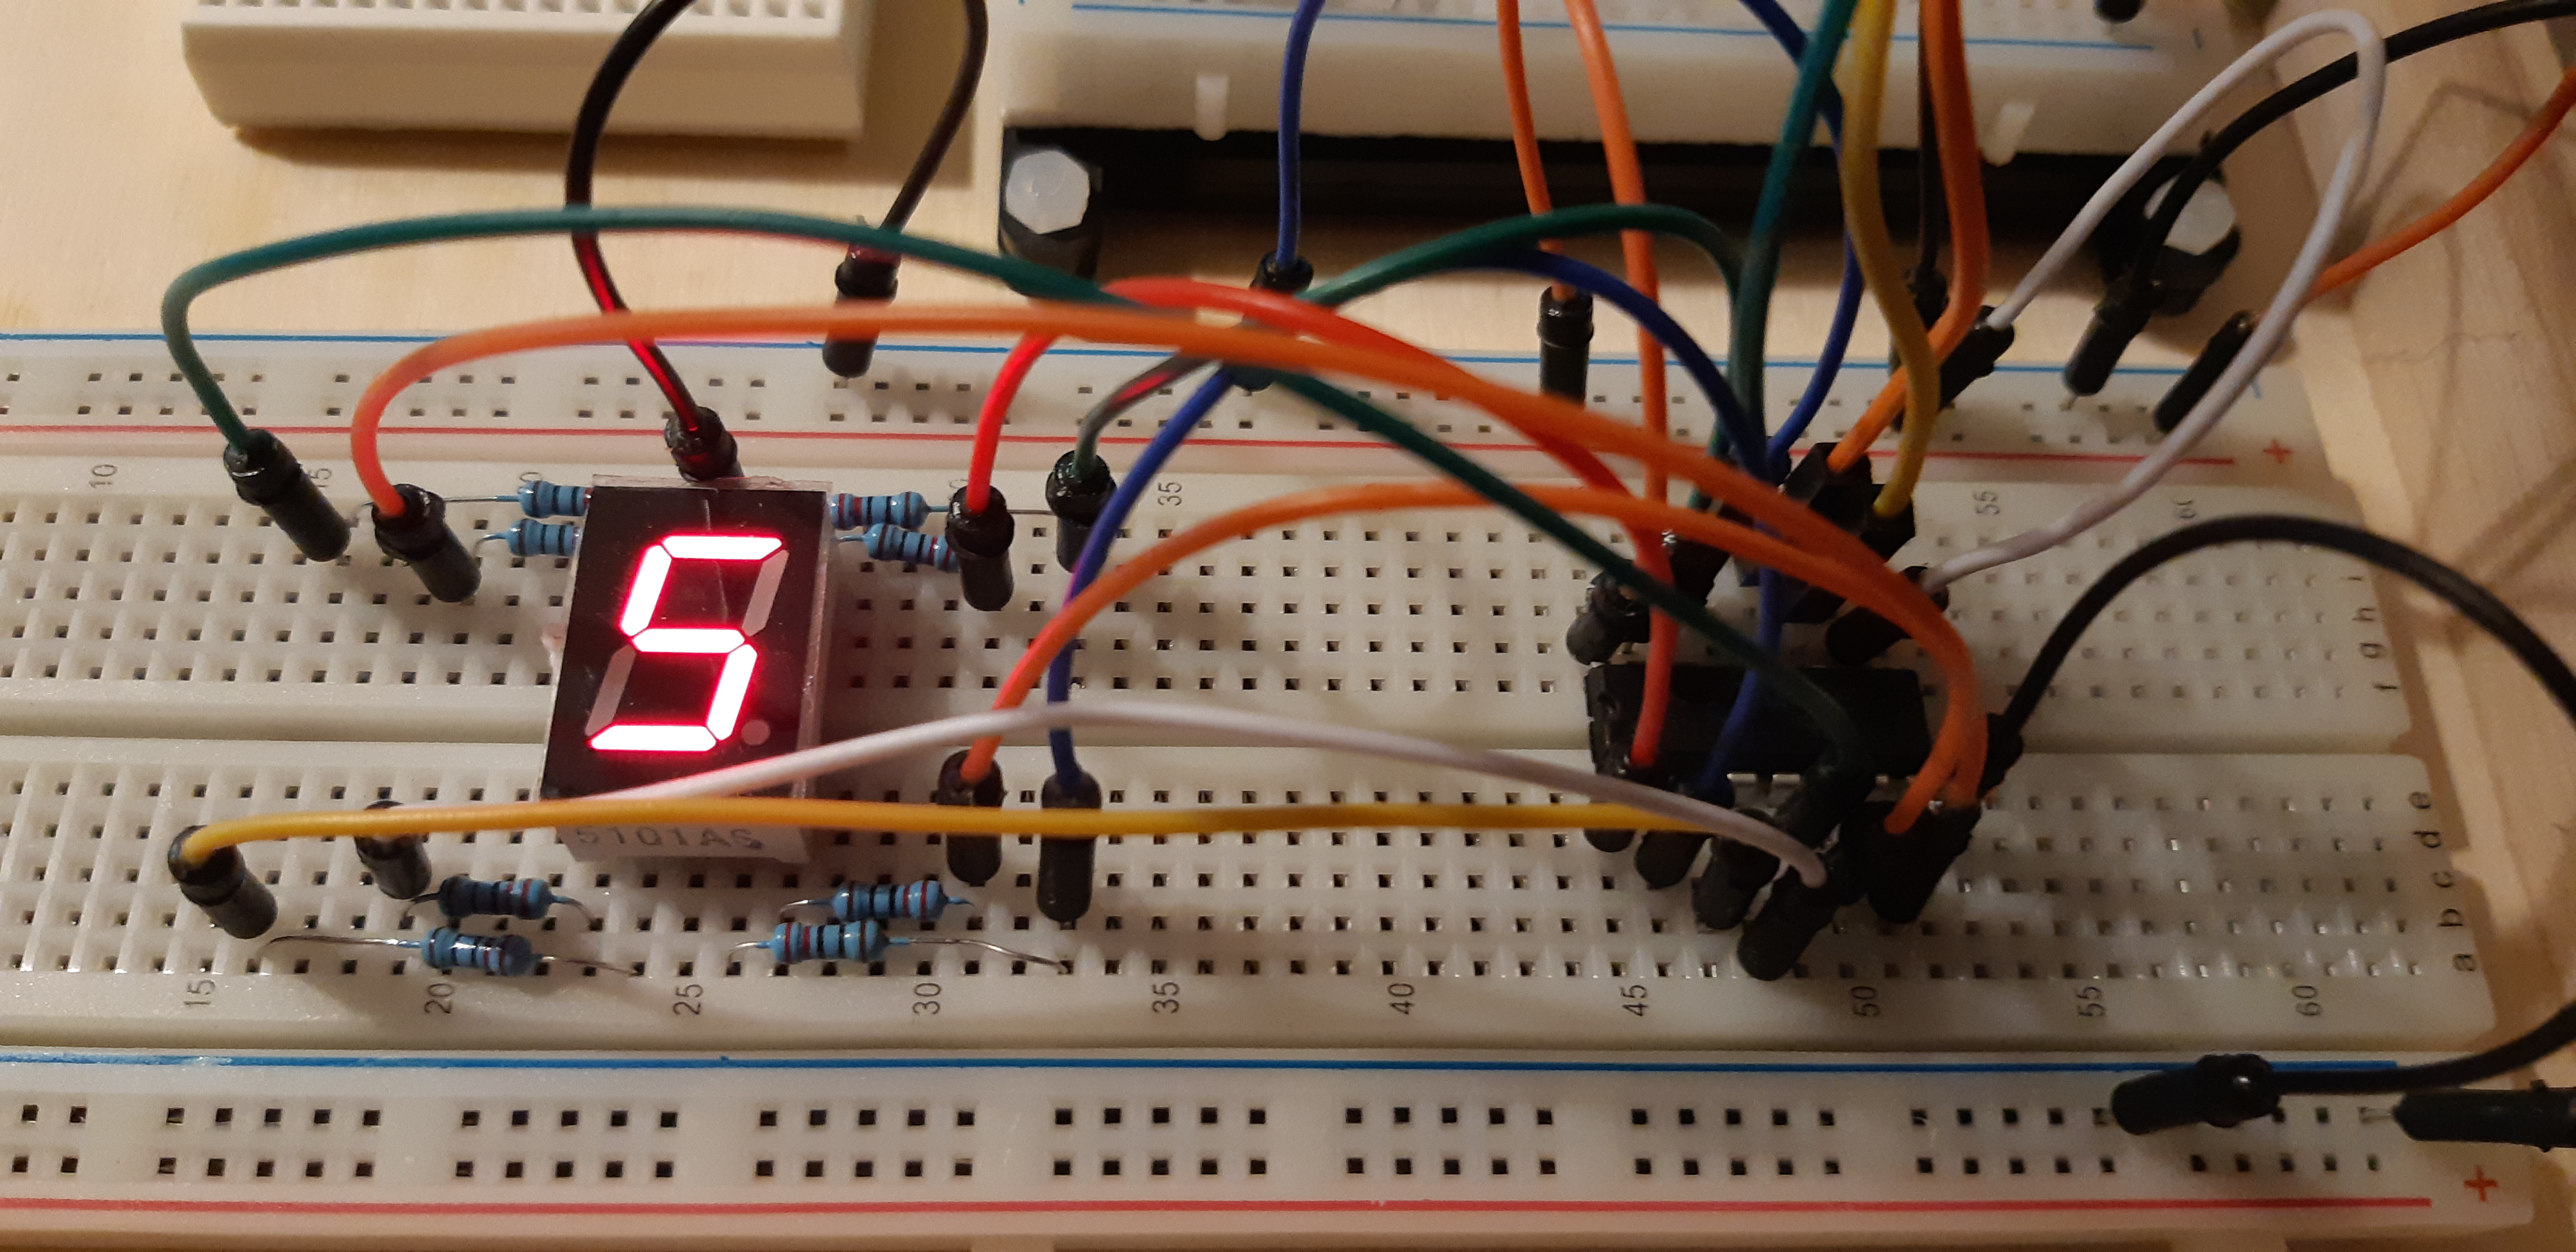 A number display with LED segments